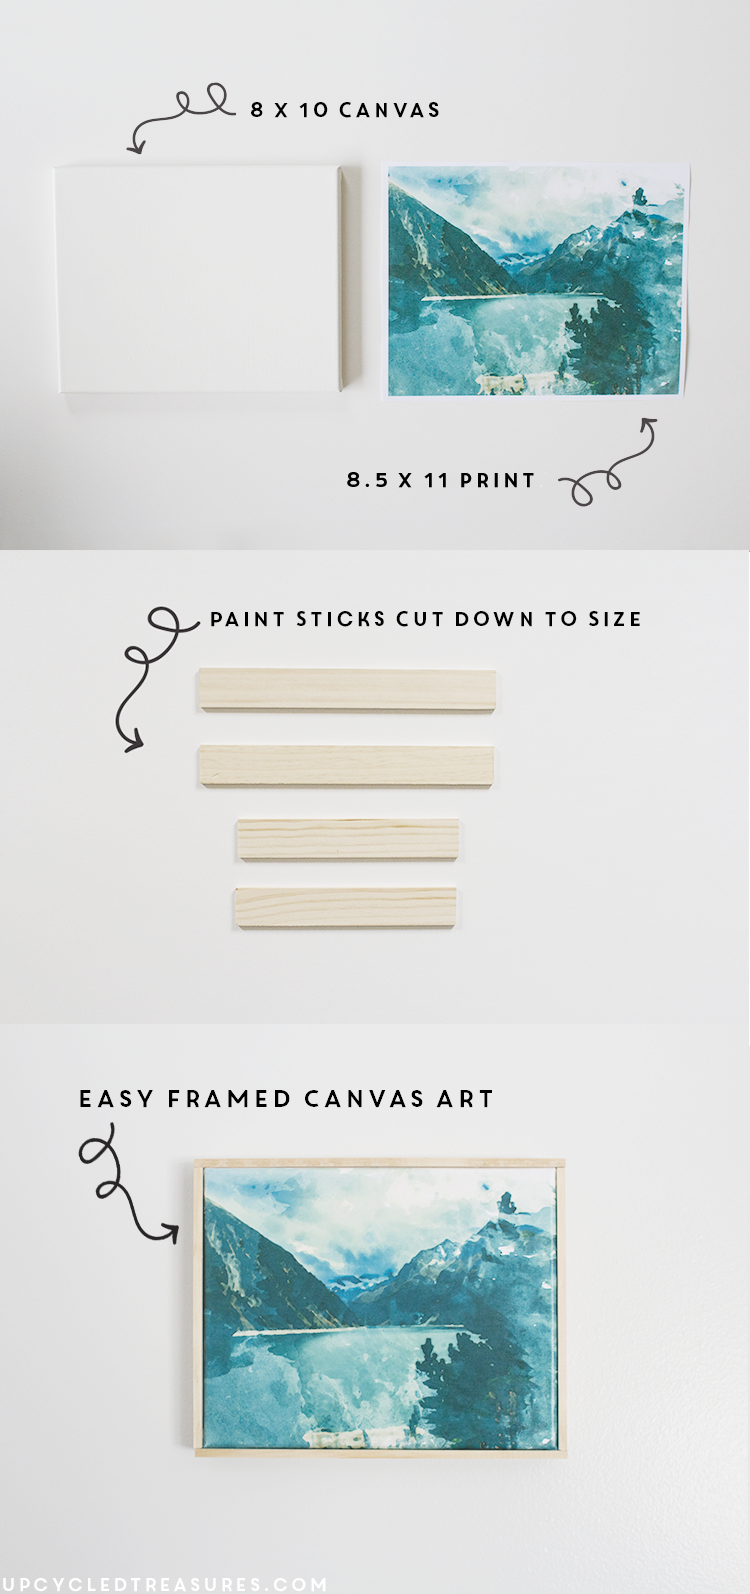 diy wall art from printed photo and upcycled paint sticks. | MountainModernLife.com